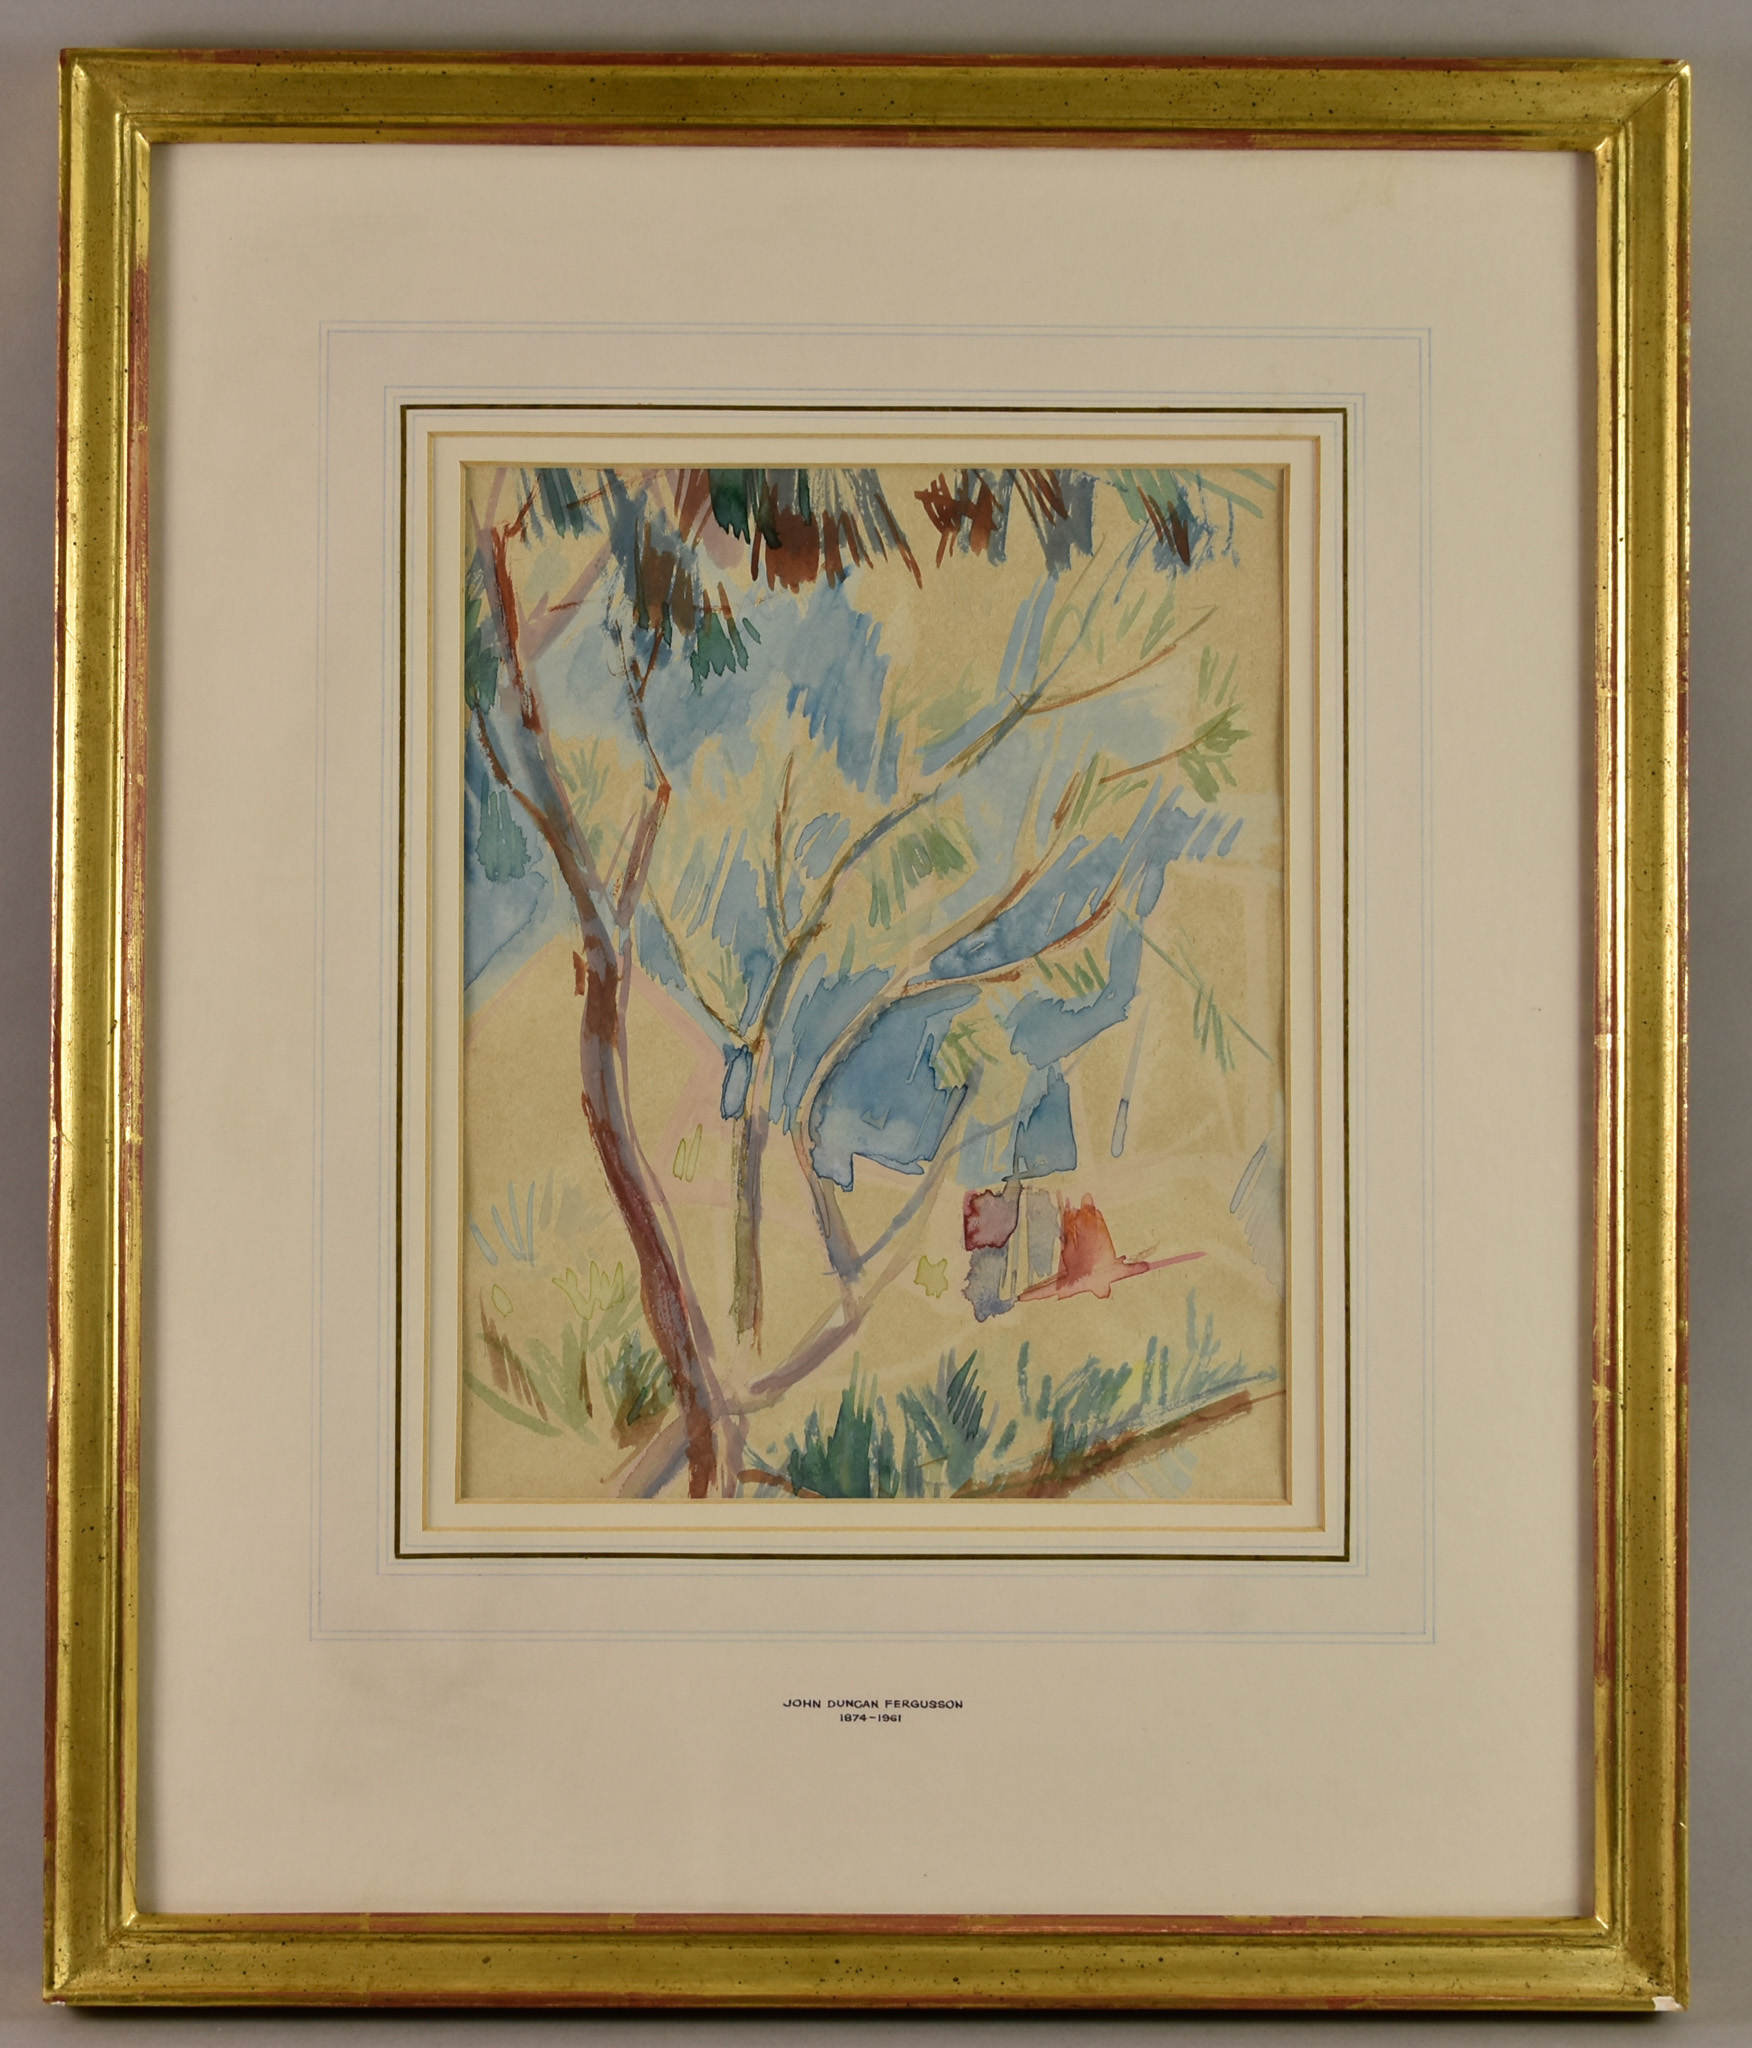 ***John Duncan Fergusson (1874-1961) - Watercolour – “Cap D’Antibes”, 9ins x 7.25ins, framed and - Image 3 of 3